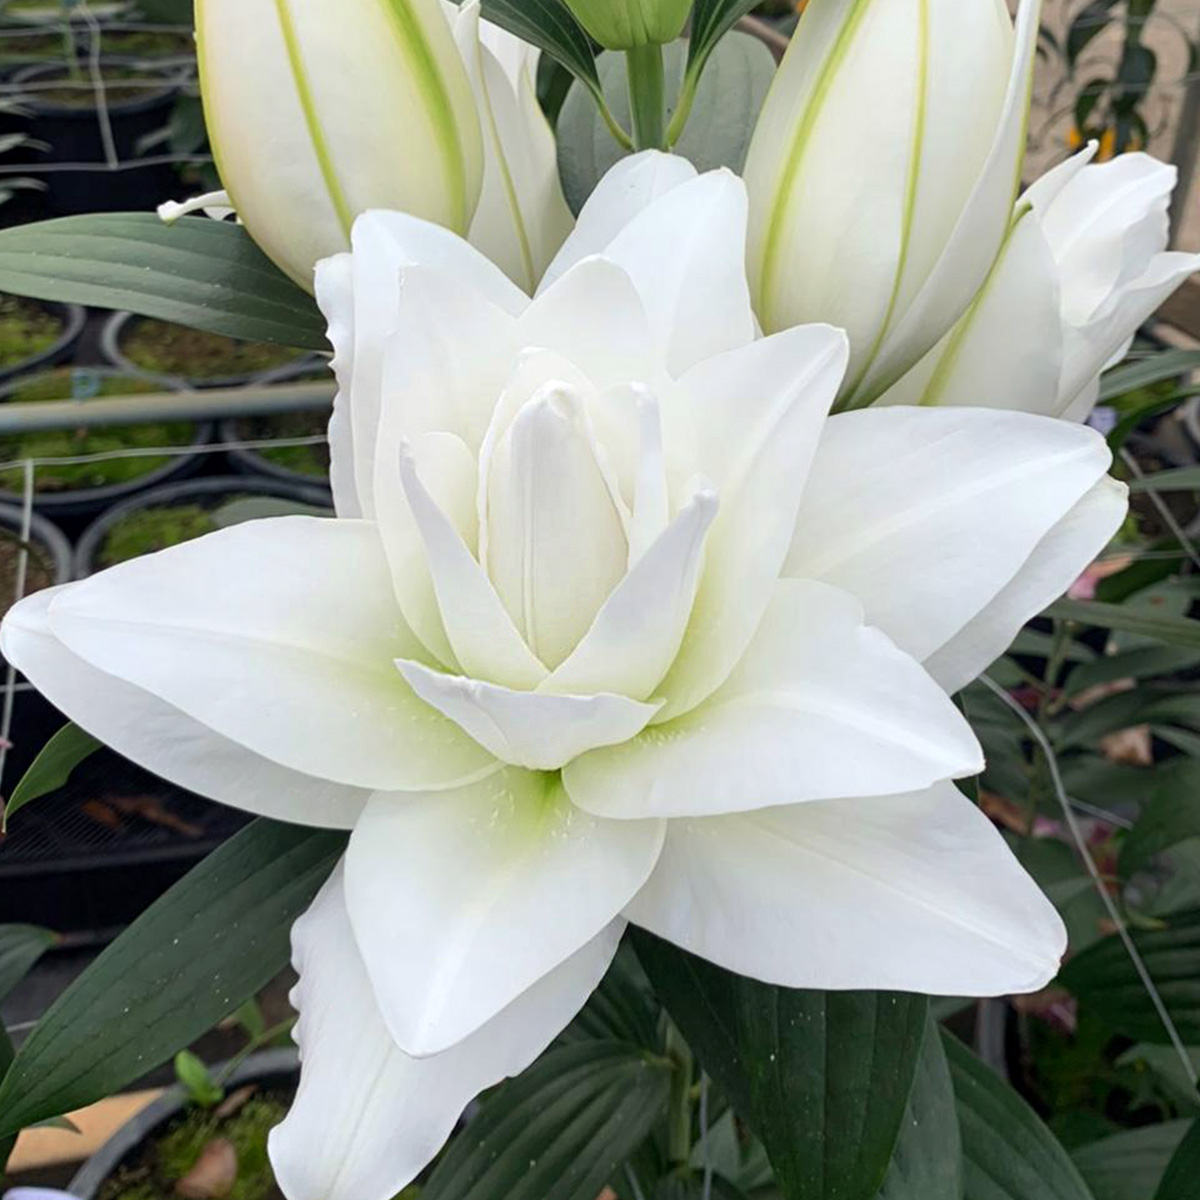 White Roselily test at De Looff Lily Innovation - on Thursd